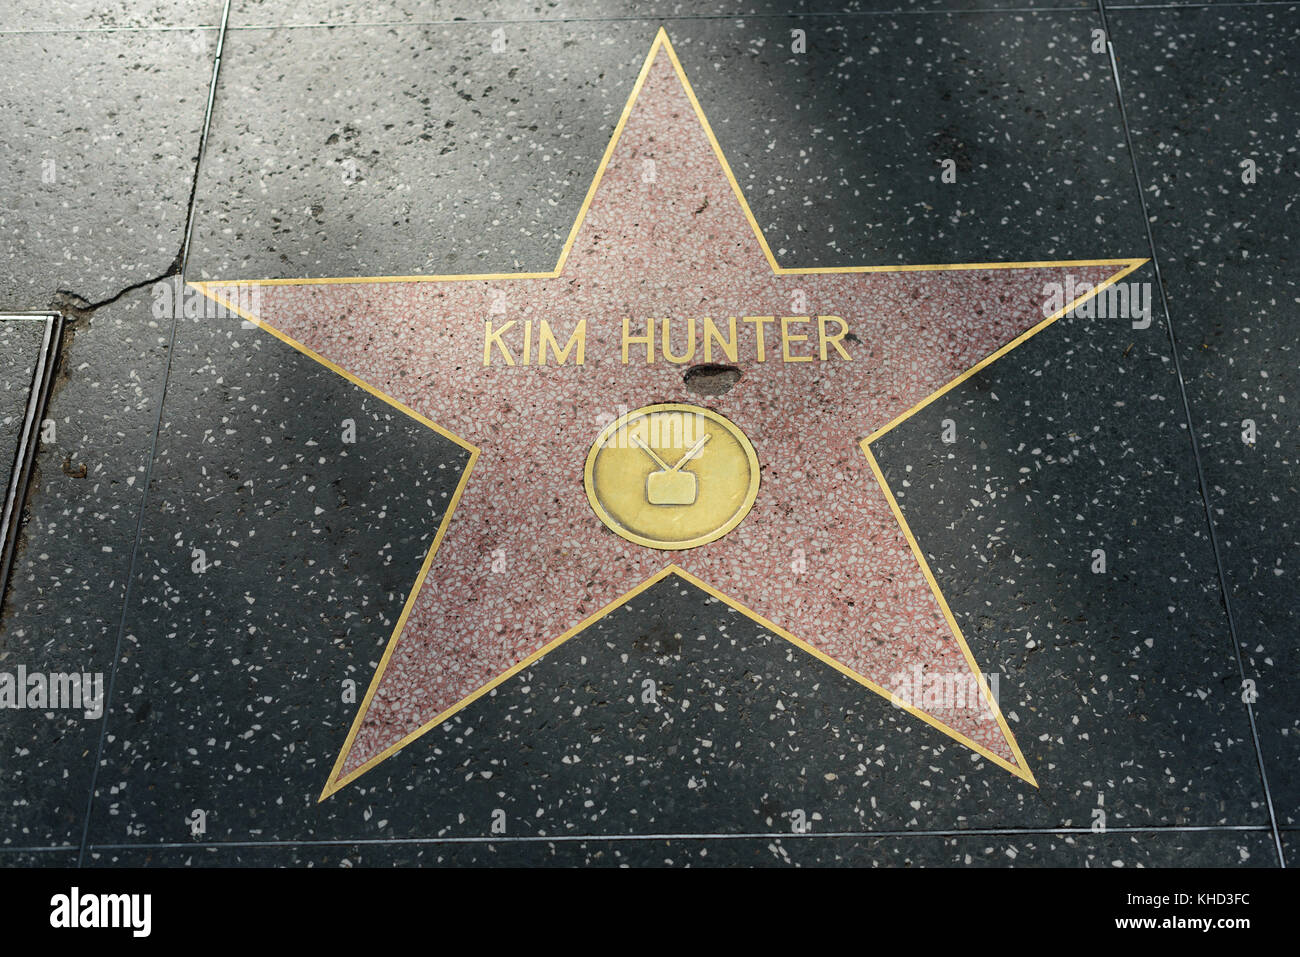 HOLLYWOOD, CA - DECEMBER 06: Kim Hunter star on the Hollywood Walk of Fame in Hollywood, California on Dec. 6, 2016. Stock Photo